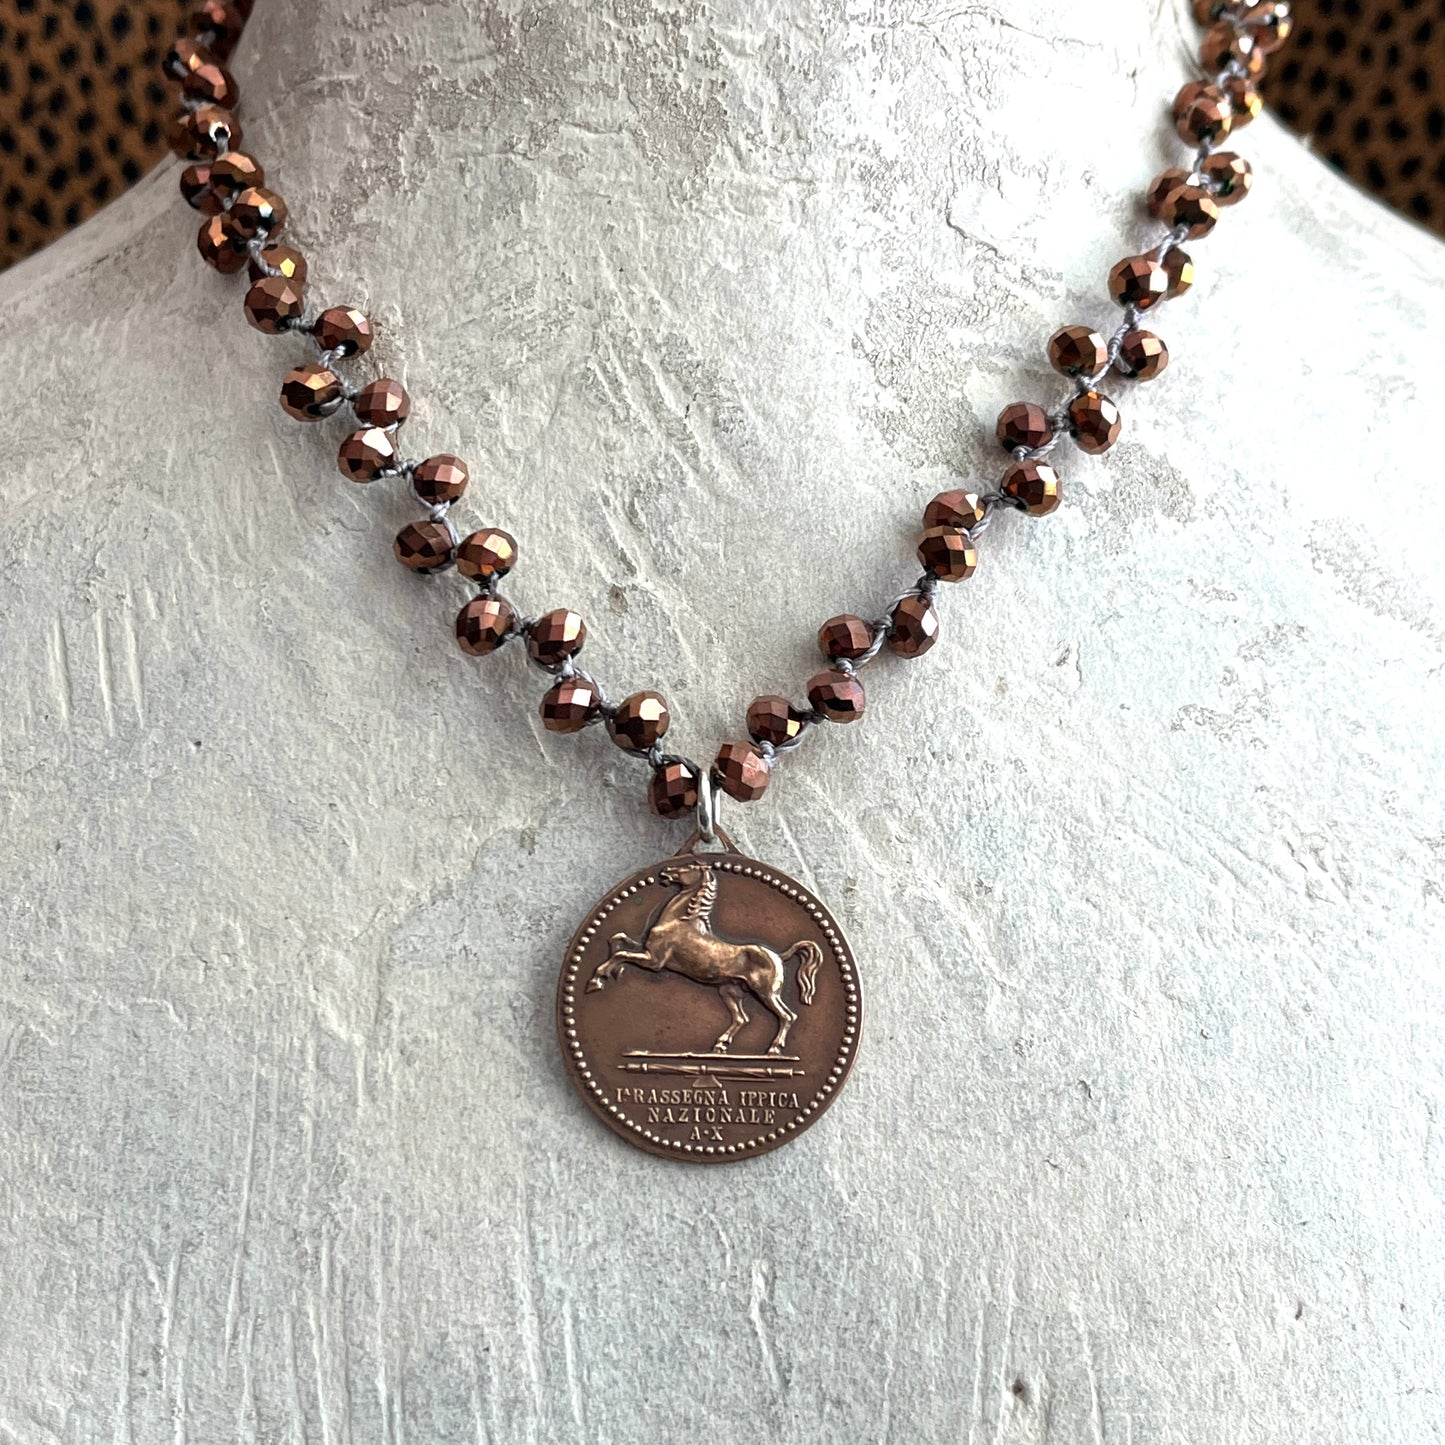 Bronze Roman Horse Medal on Copper Crystal Necklace